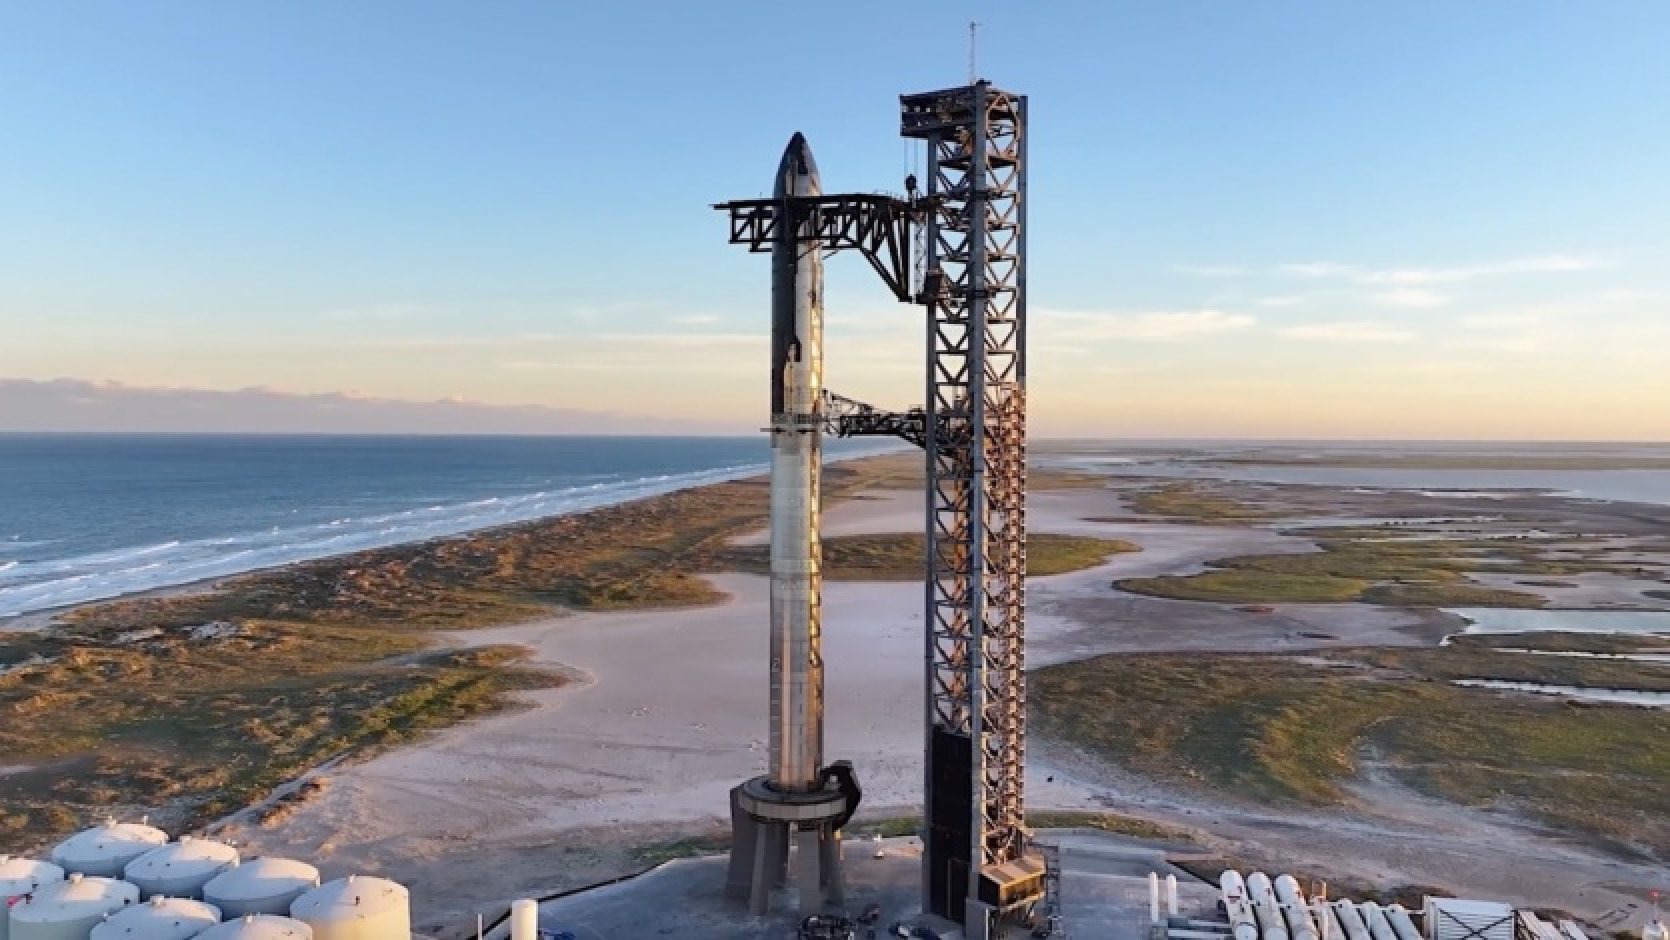 SpaceX has requested FAA authorization for at least 9 Starship test launches this year